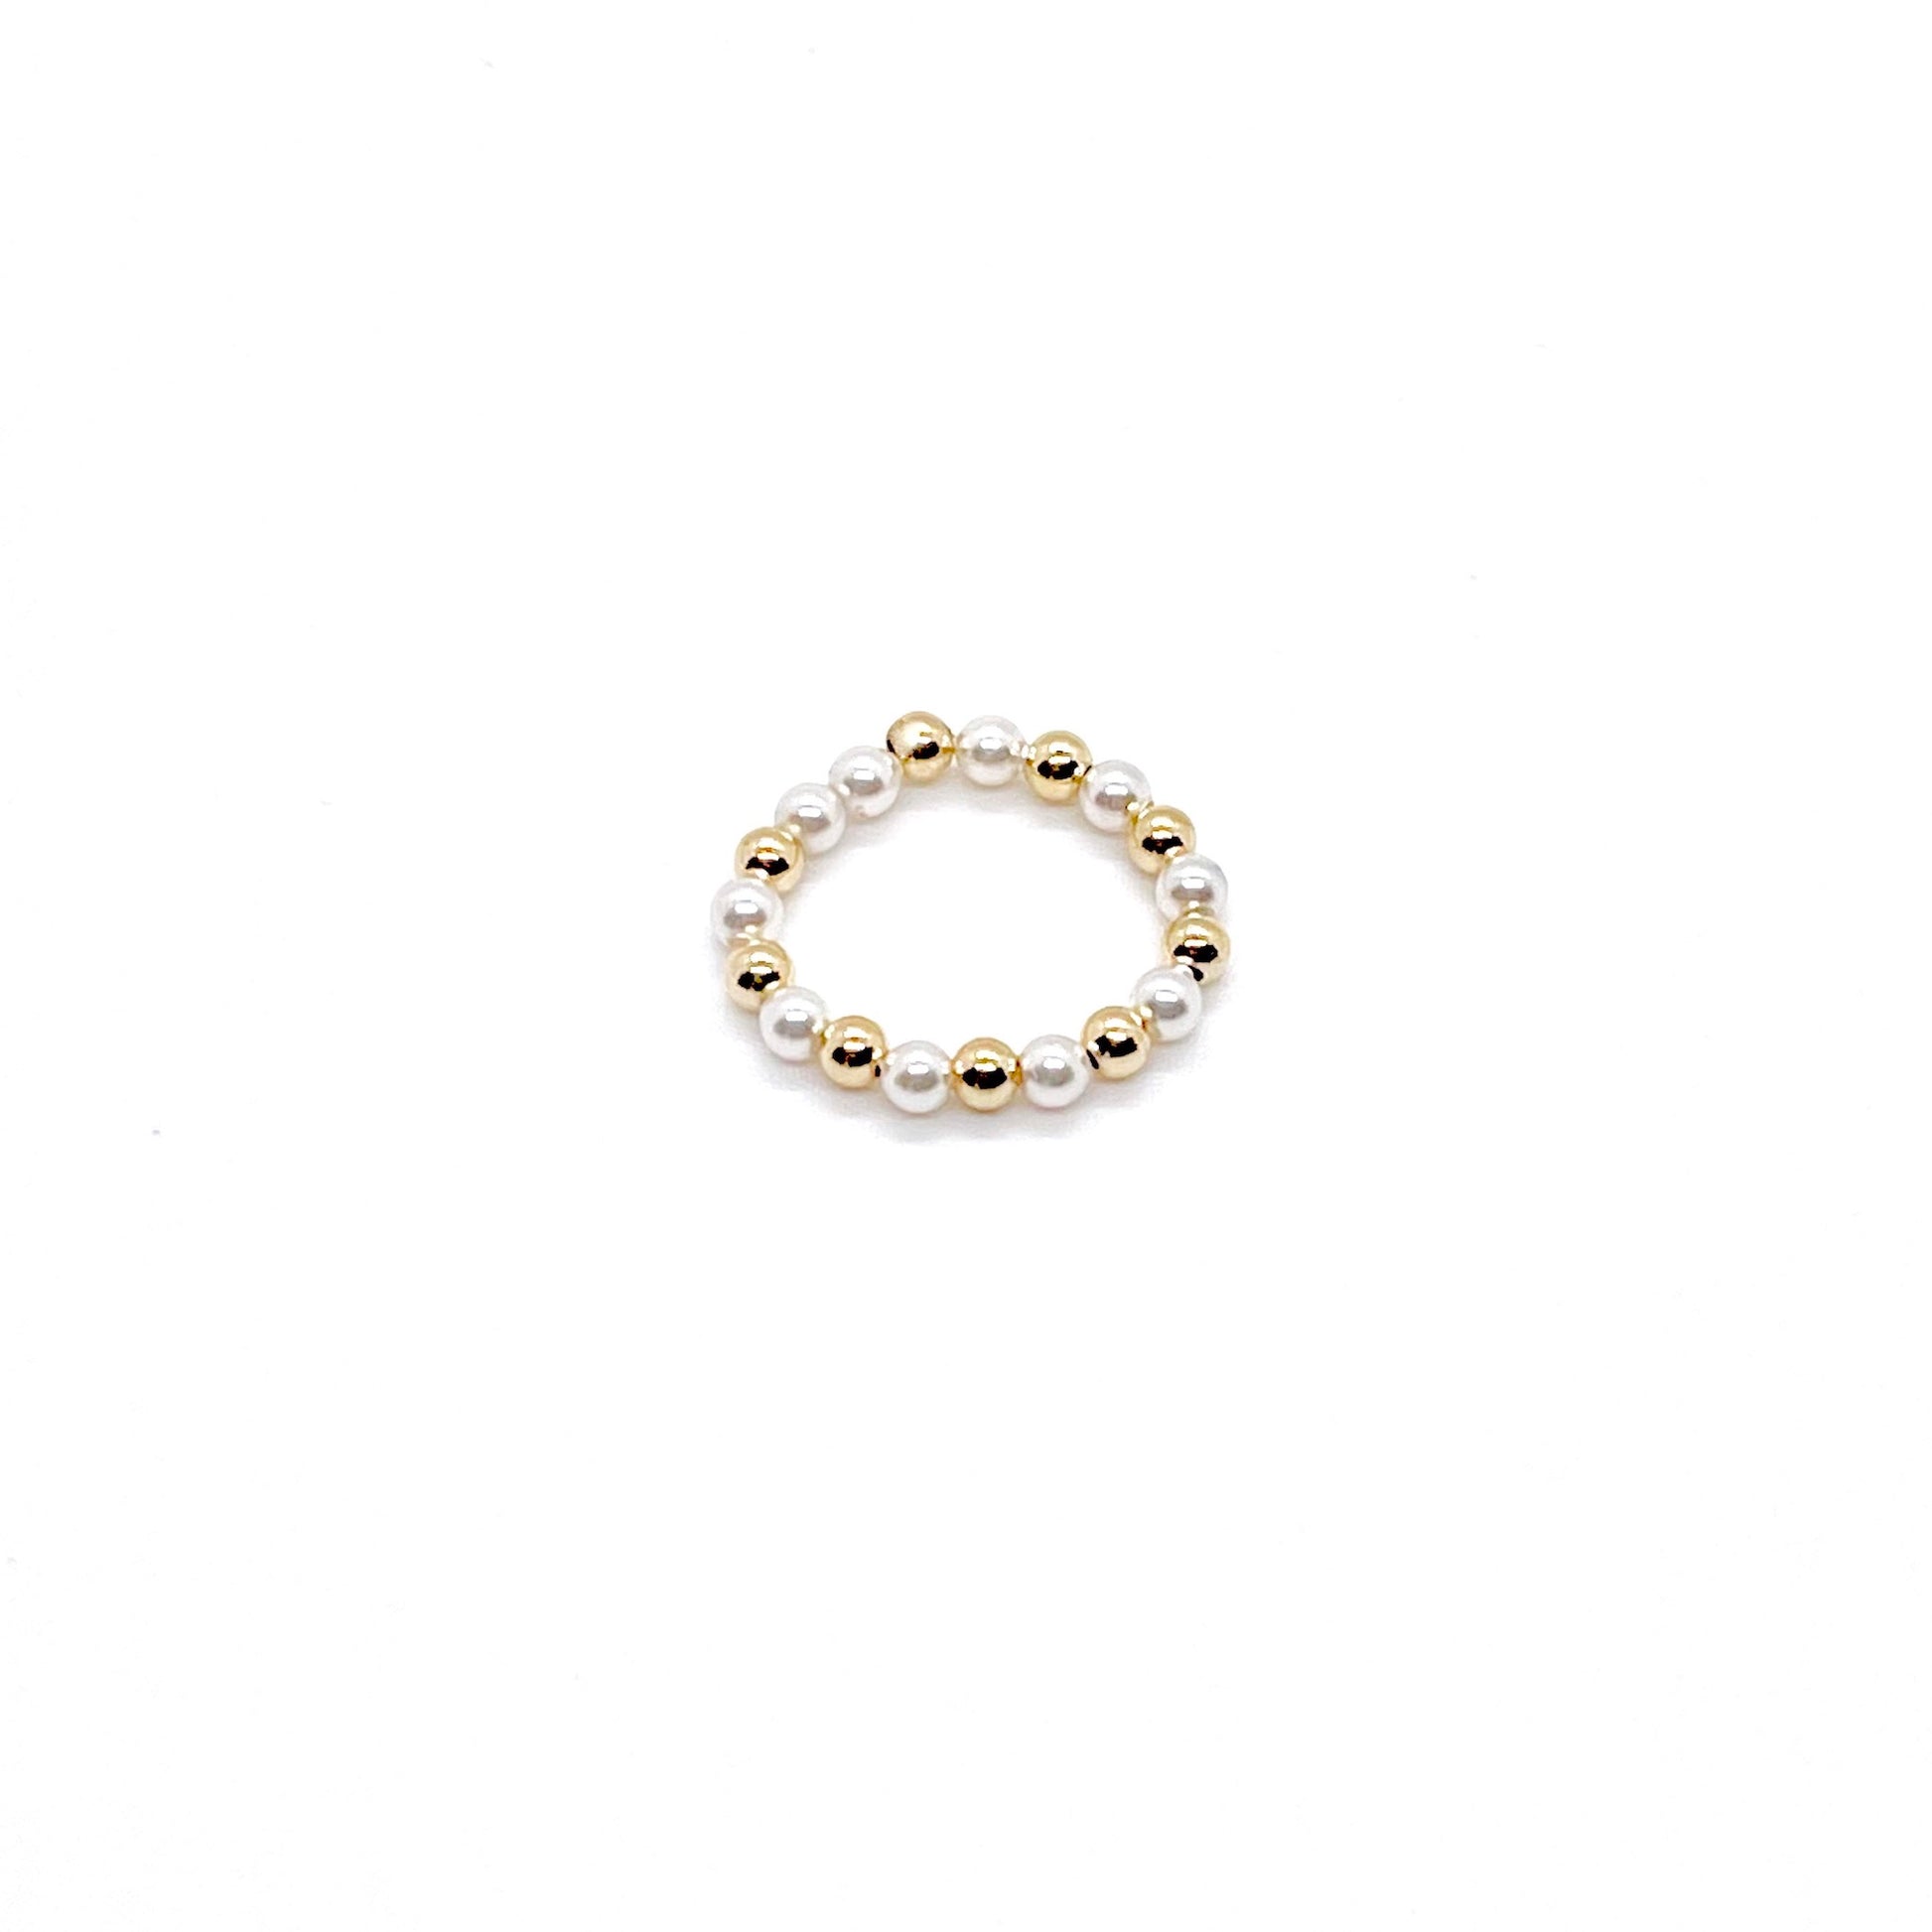 Pearl stackable ring with alternating 3mm 14K gold filled balls and crystal pearl beads on a stretch cord.